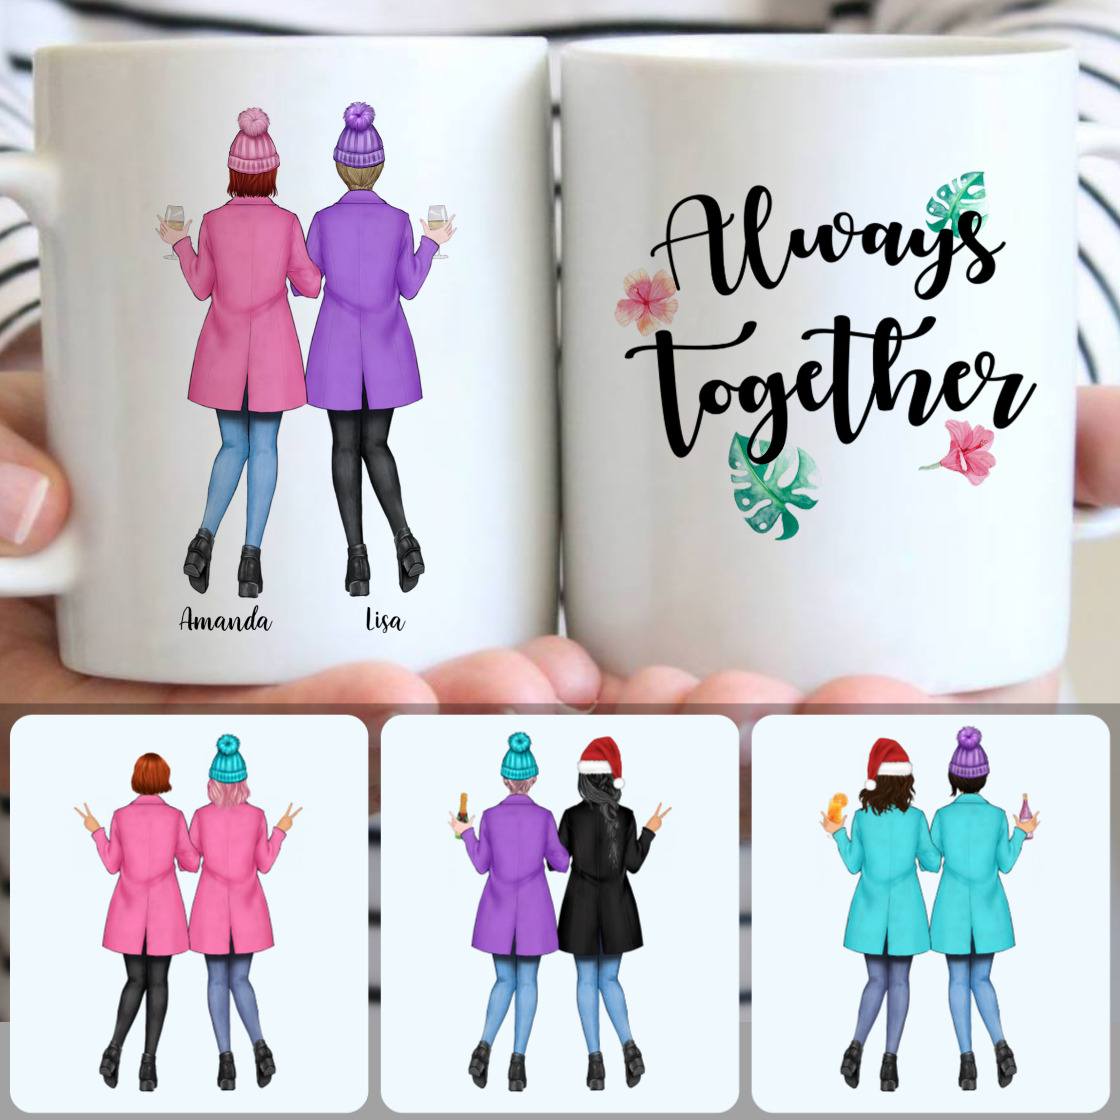 Personalized Mug, Meaningful Christmas Gifts, 2 Besties Forever Customized Coffee Mug With Names